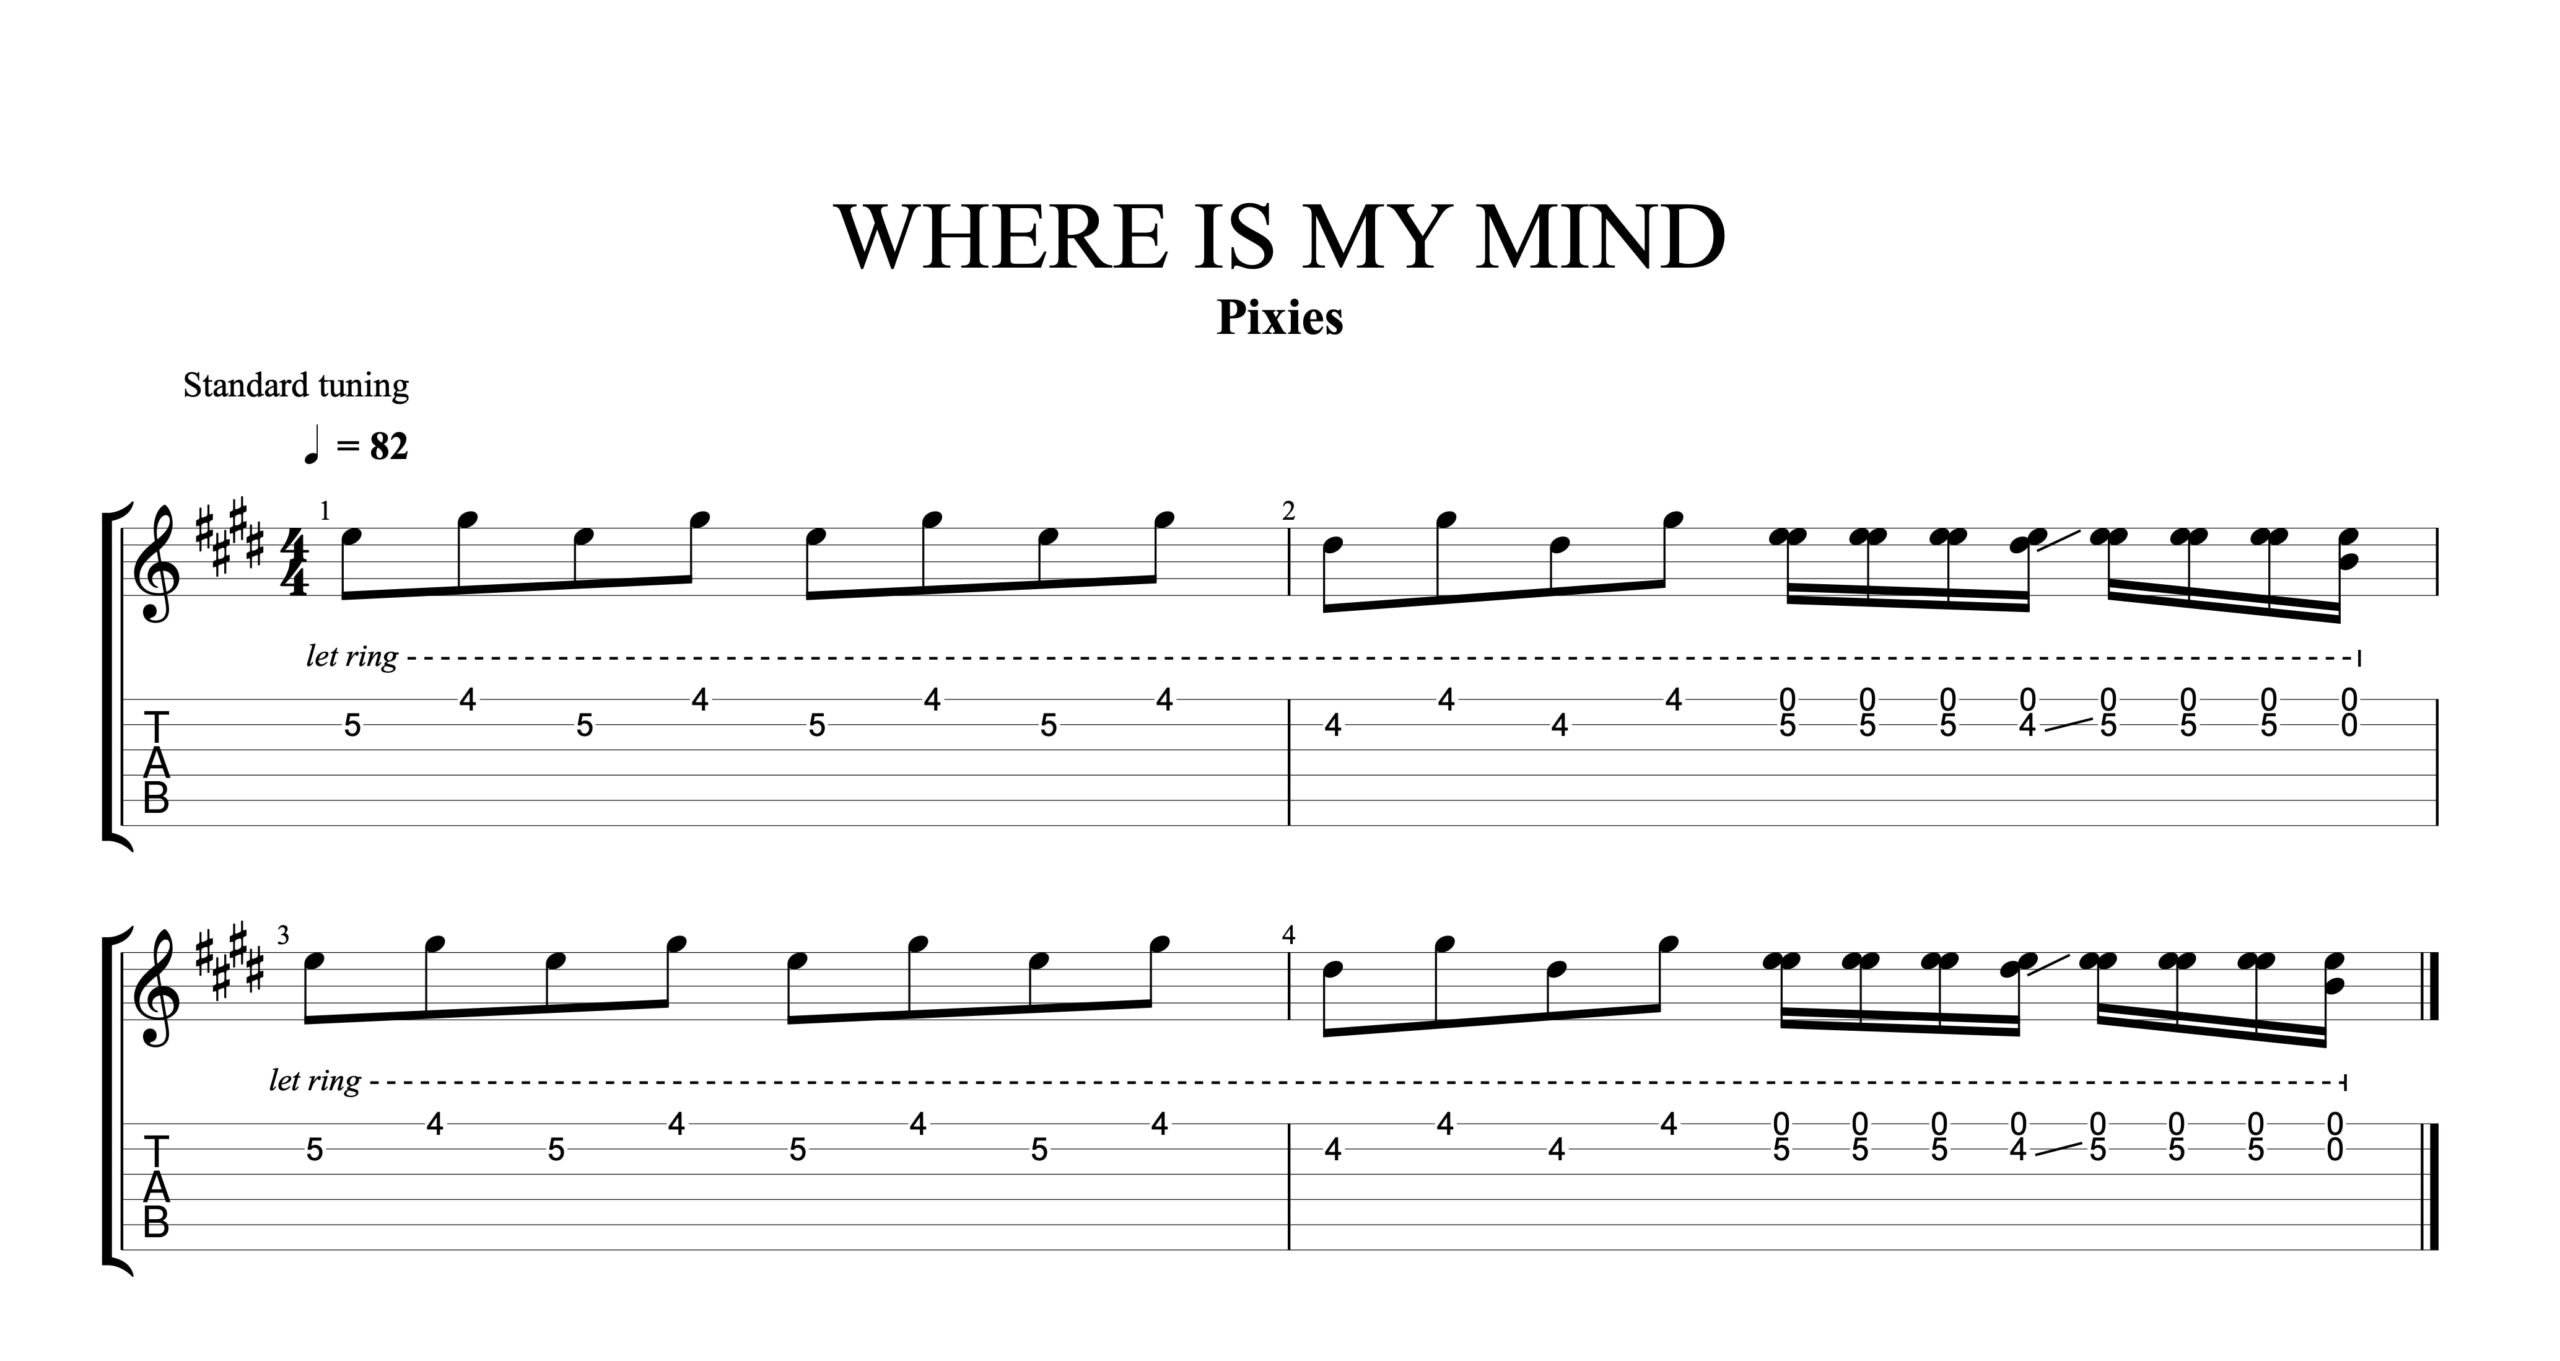 Guitar Pro tab for 'Murderers 3' song by John frusciante